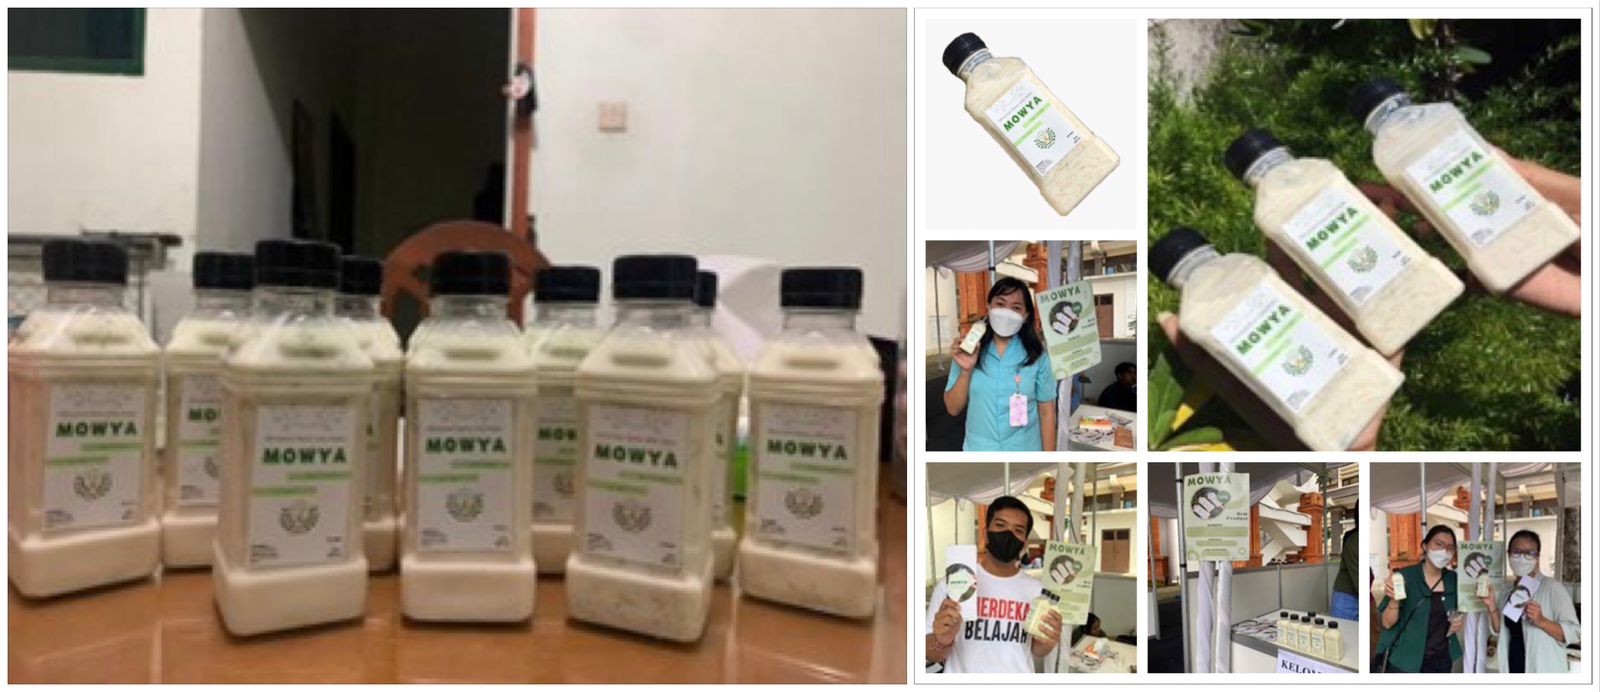 Creative, Food Technology Students Create Soy Milk Drinks With Jelly Made From Moringa Leaves (Mowya) As A Healthy Drink With A Million Benefits